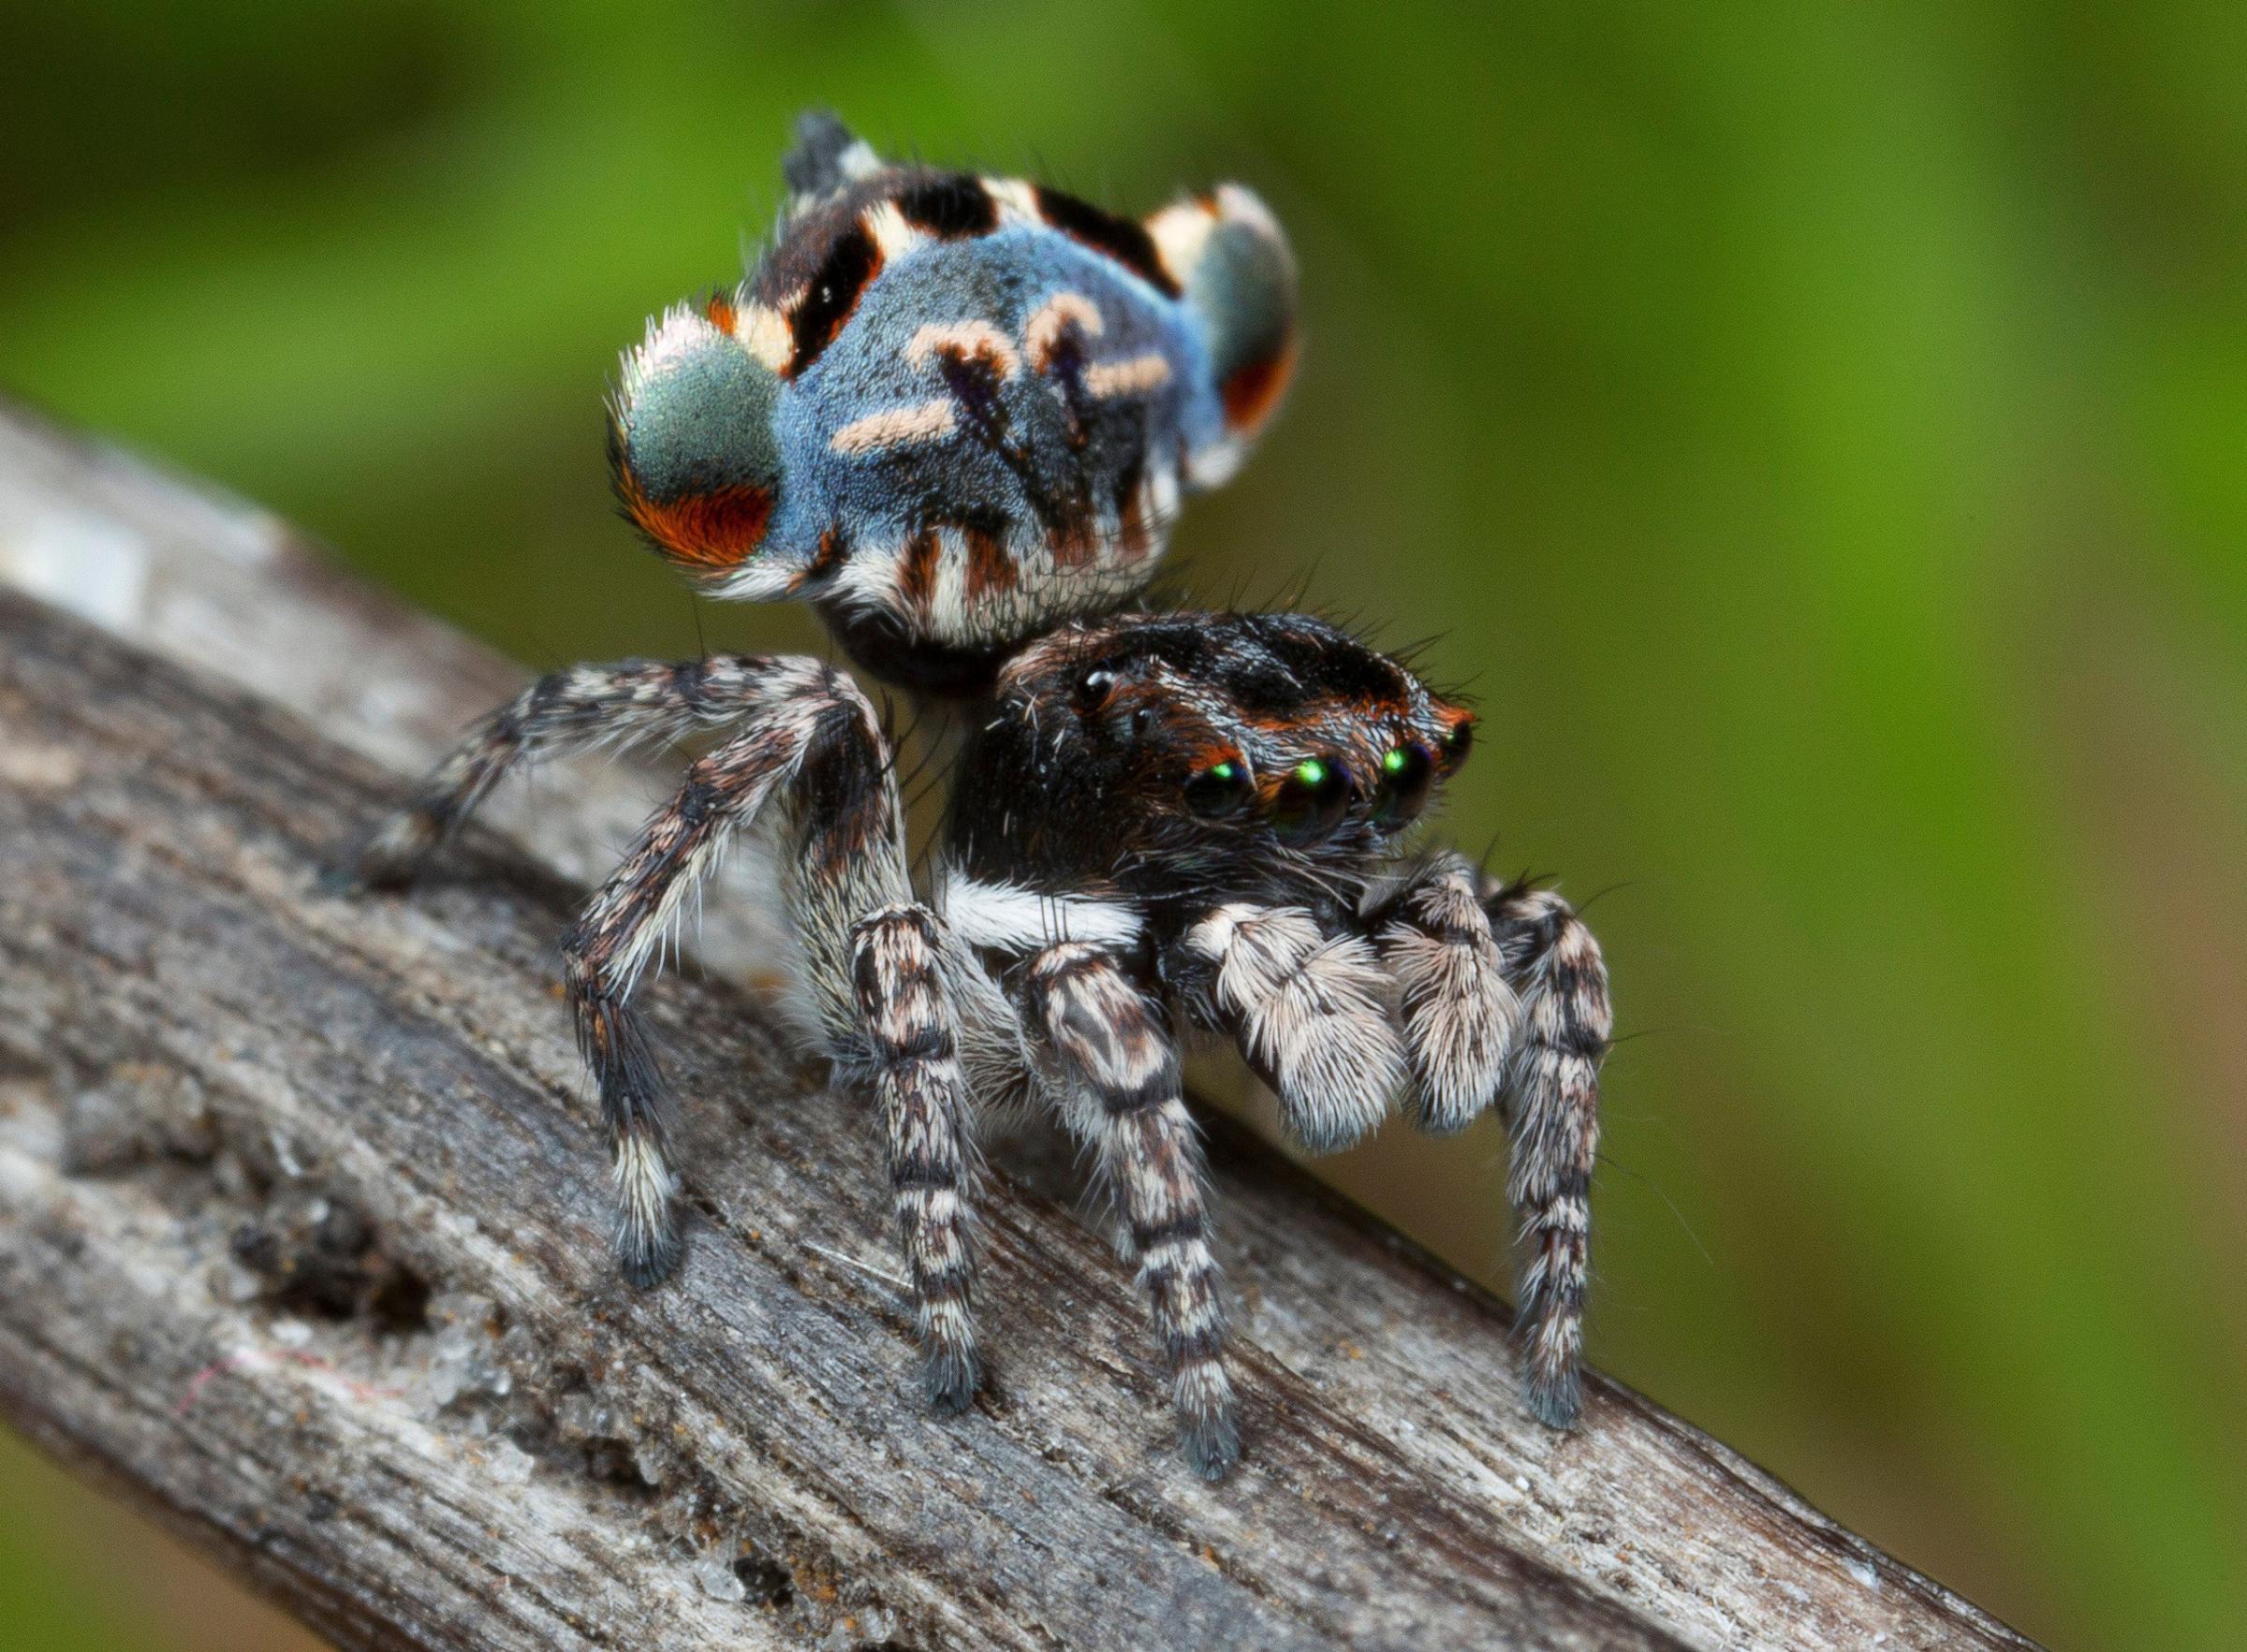 After seeing a photo of this spider in Western Australia, Jürgen raised this Maratus Lobatus spider from an egg before photographing and identifying it.